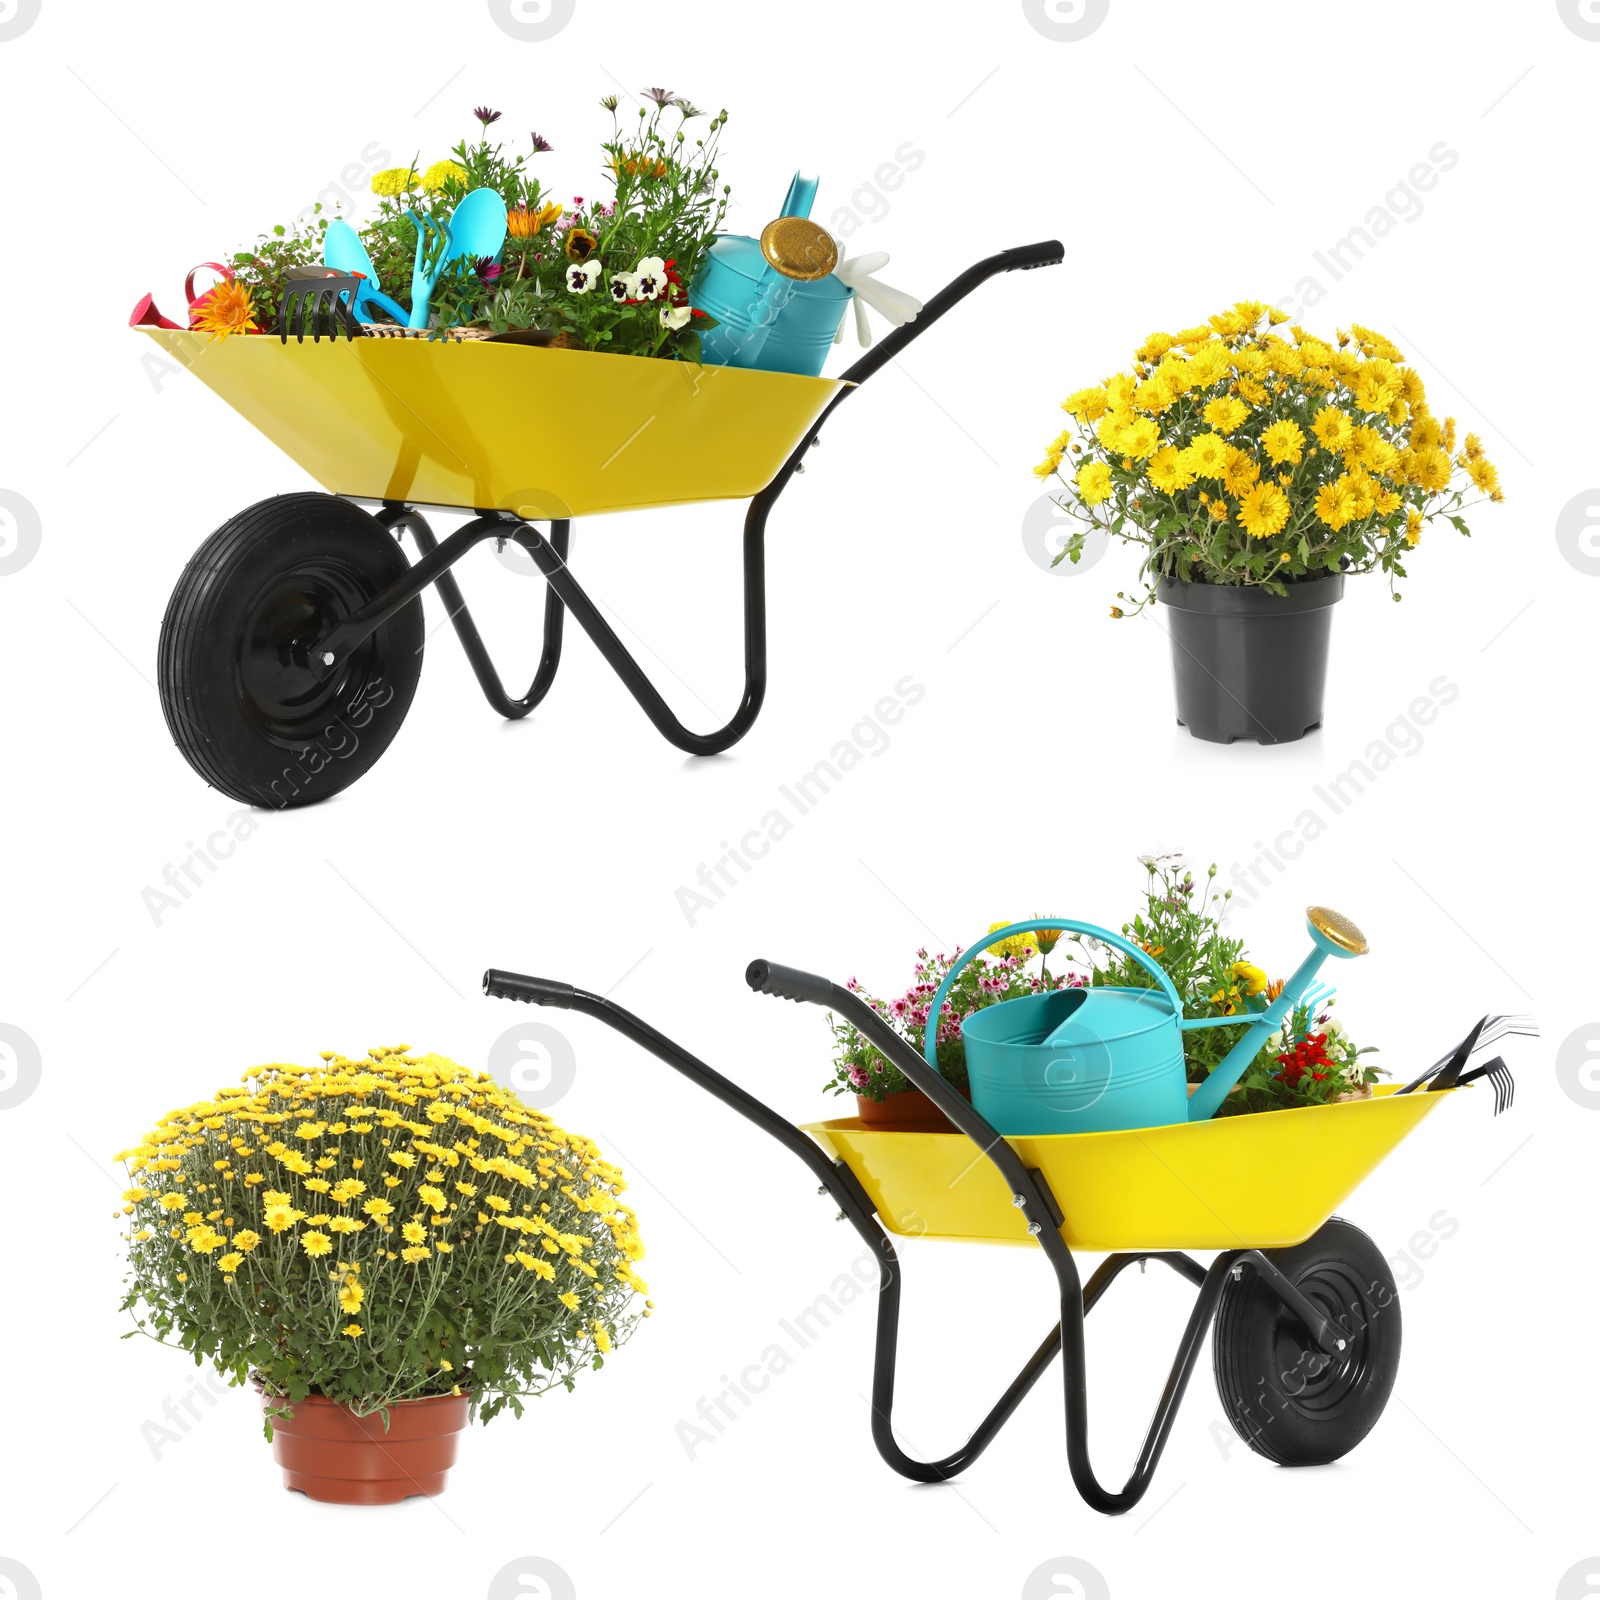 Image of Set with different gardening tools, wheelbarrows and plants on white background 